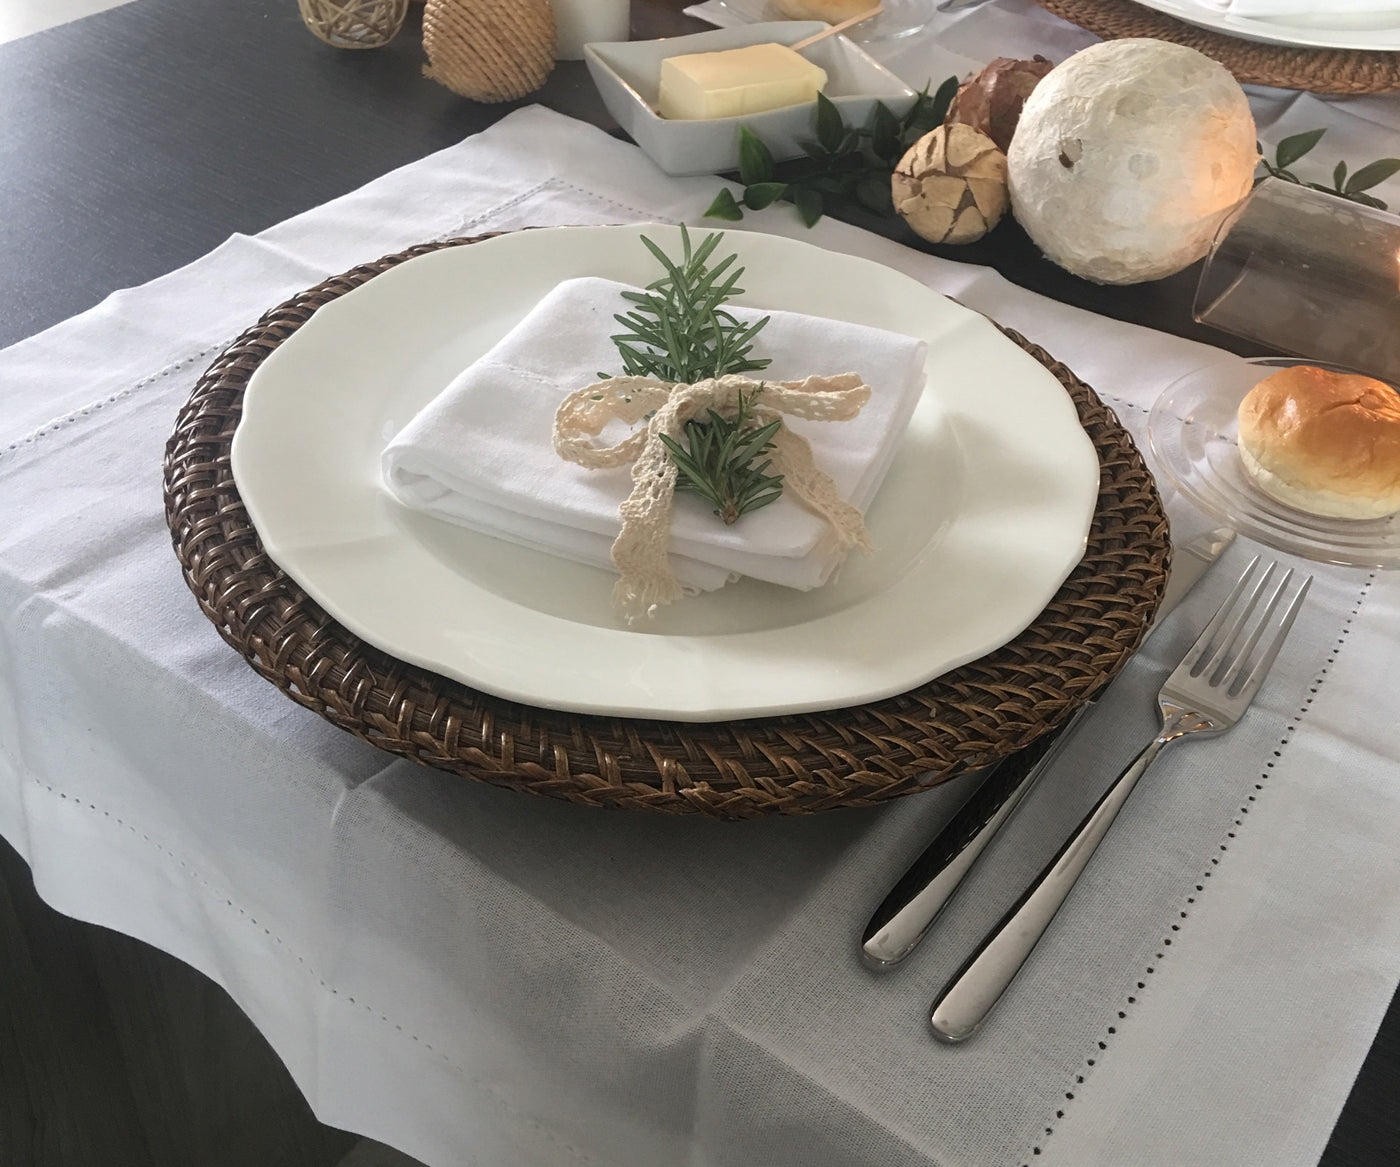 White cotton table napkins are essential elements of a beautifully set table, adding a touch of elegance and sophistication to the dining experience.